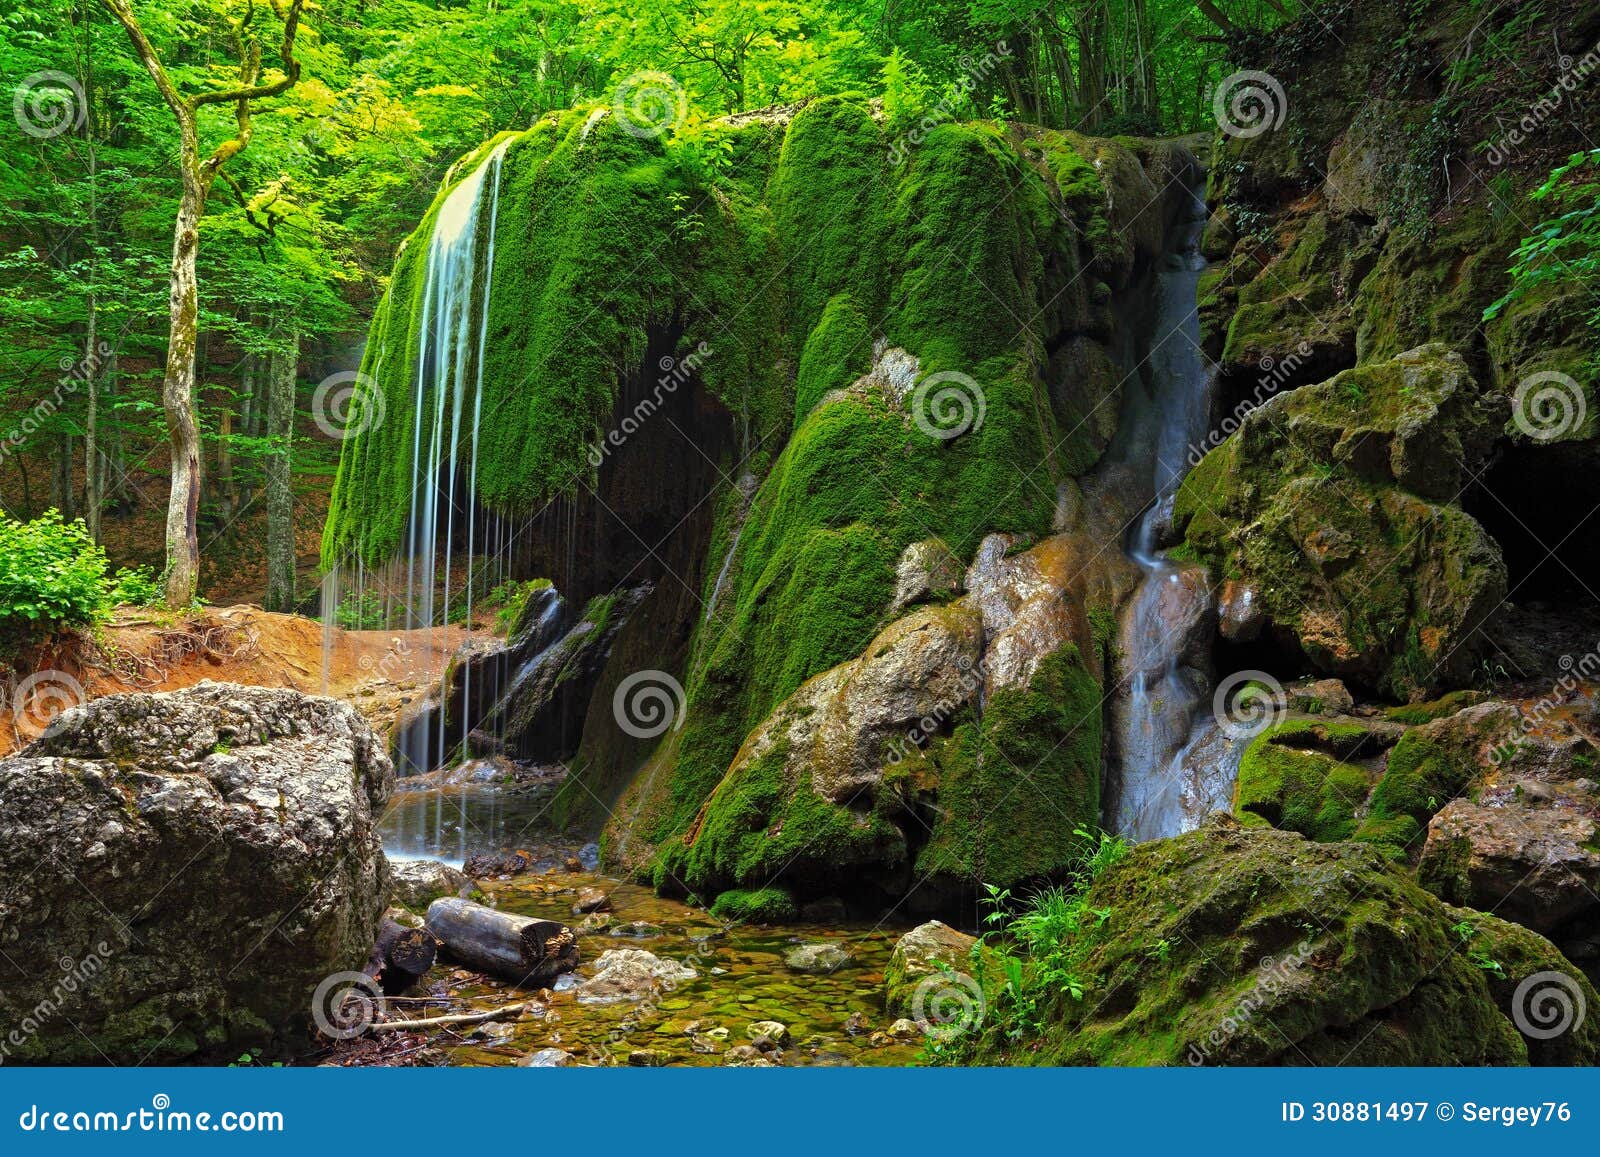 waterfall in crimea forest and wet mossy stone